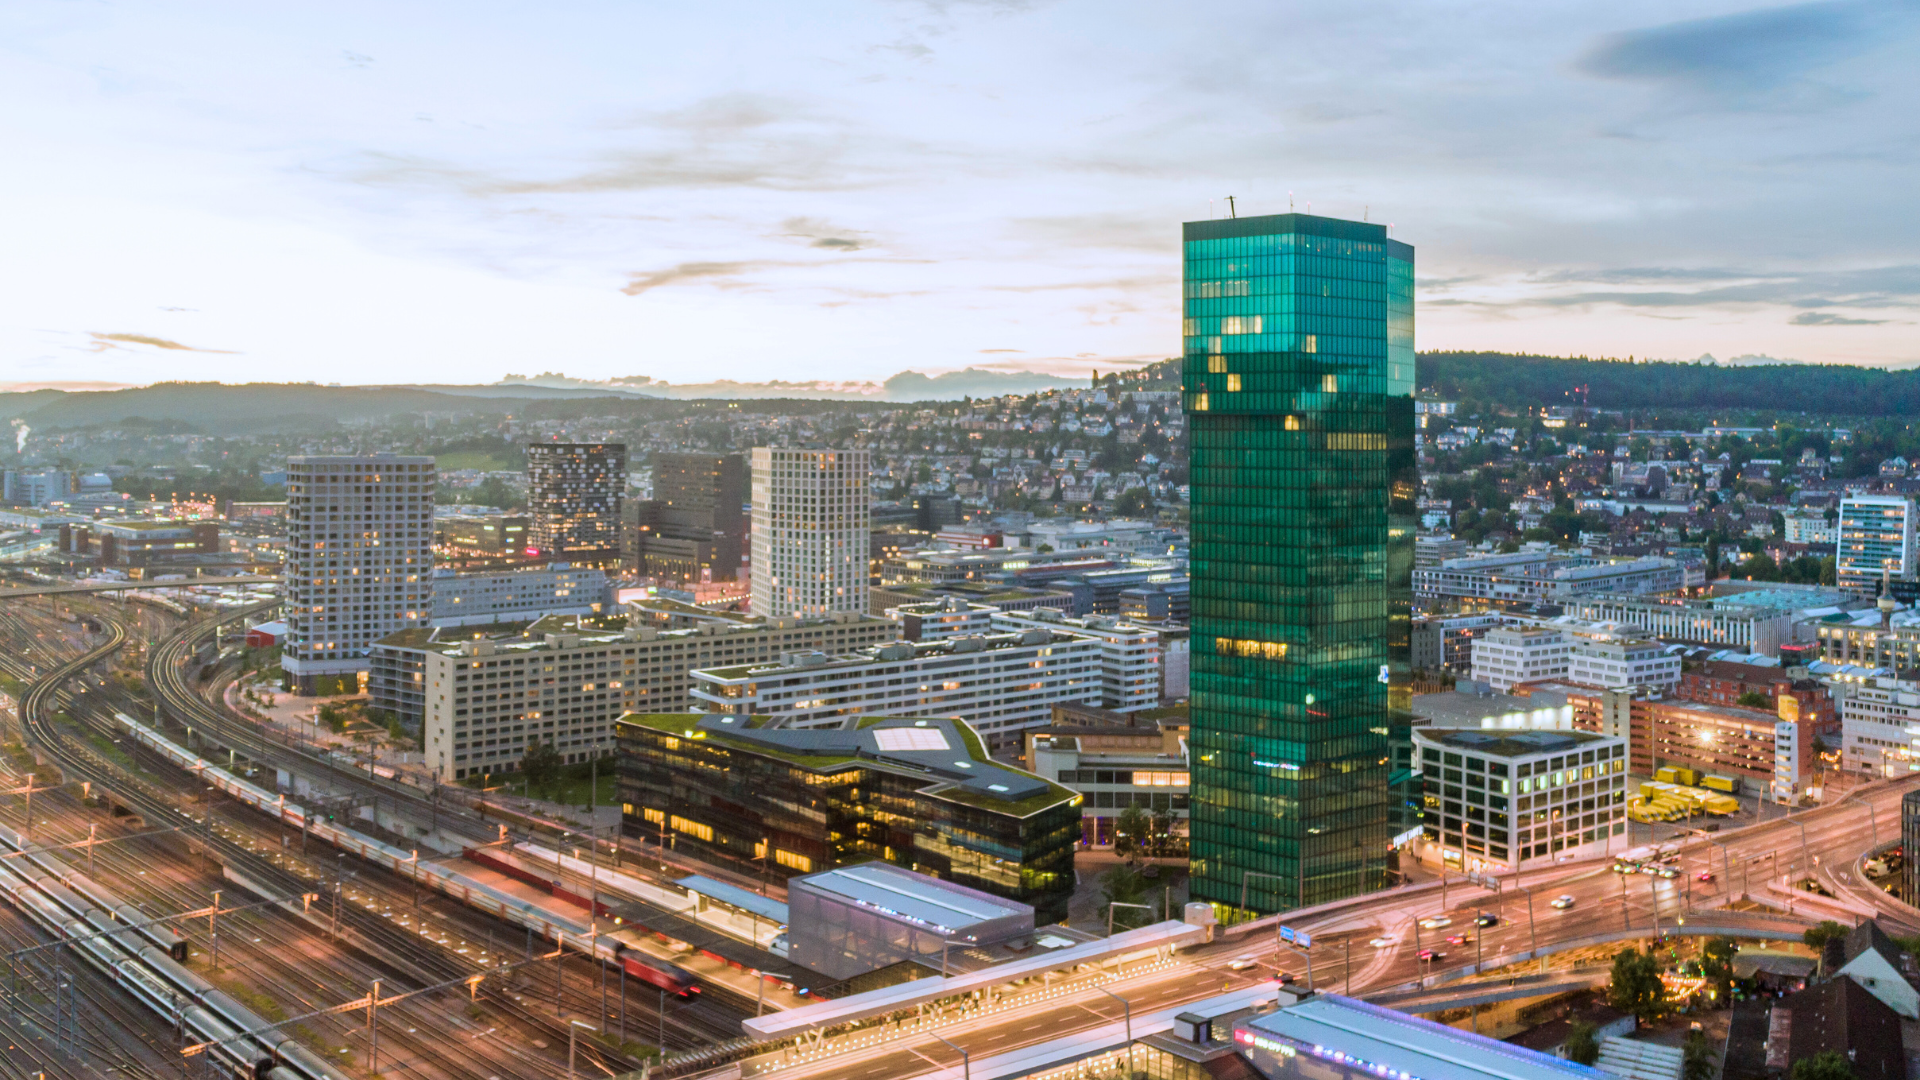 Greater Zurich is the ideal business-friendly location for international companies to grow with economic and political stability, European market access, a highly qualified workforce, pragmatic regulations, a competitive tax system, and an excellent infrastructure.